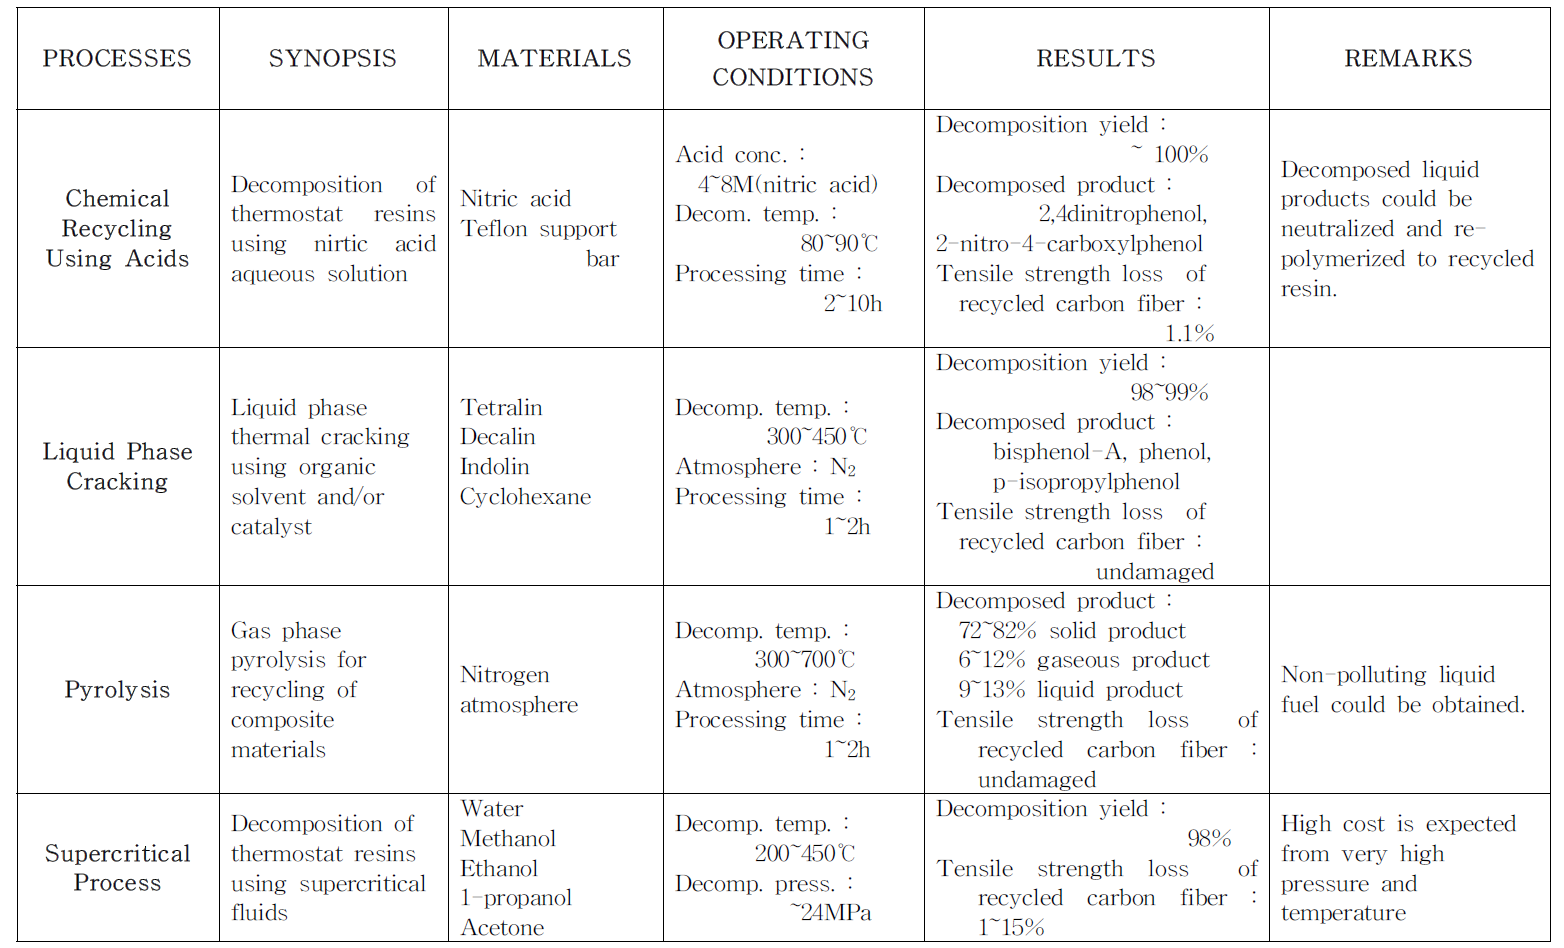 Comparison of recycling processes for epoxy resin composites